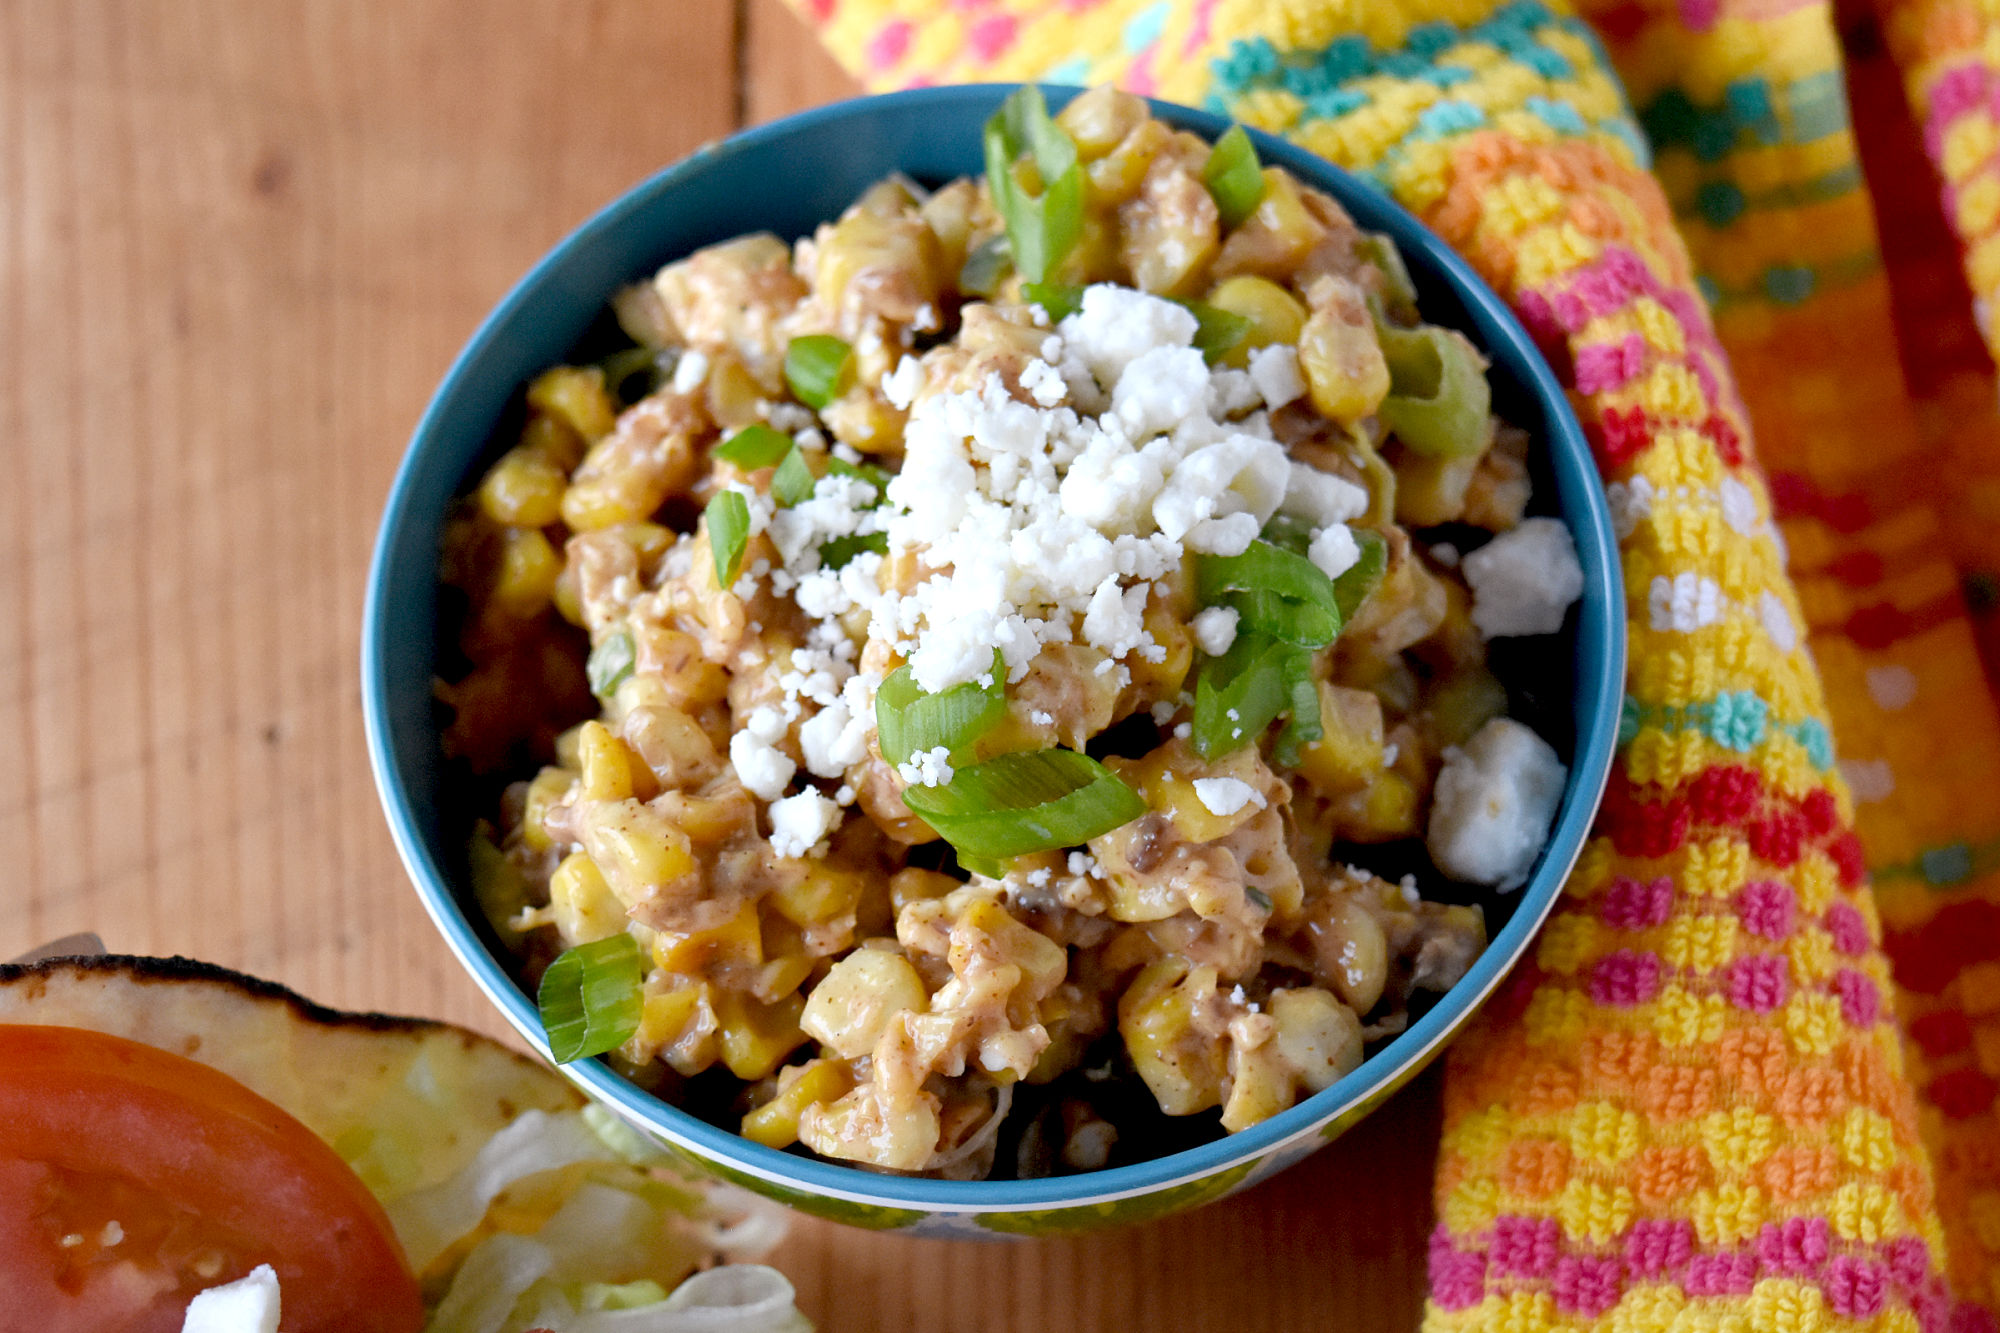 (Southern Fried) Mexican Corn Salad is a combination of southern style fried corn and Mexican corn salad.  The corn is caramelized with butter, then cooled and combined with Mexican corn dressing. #FarmersMarketWeek #streetcorn #Mexicancorn #friedcorn